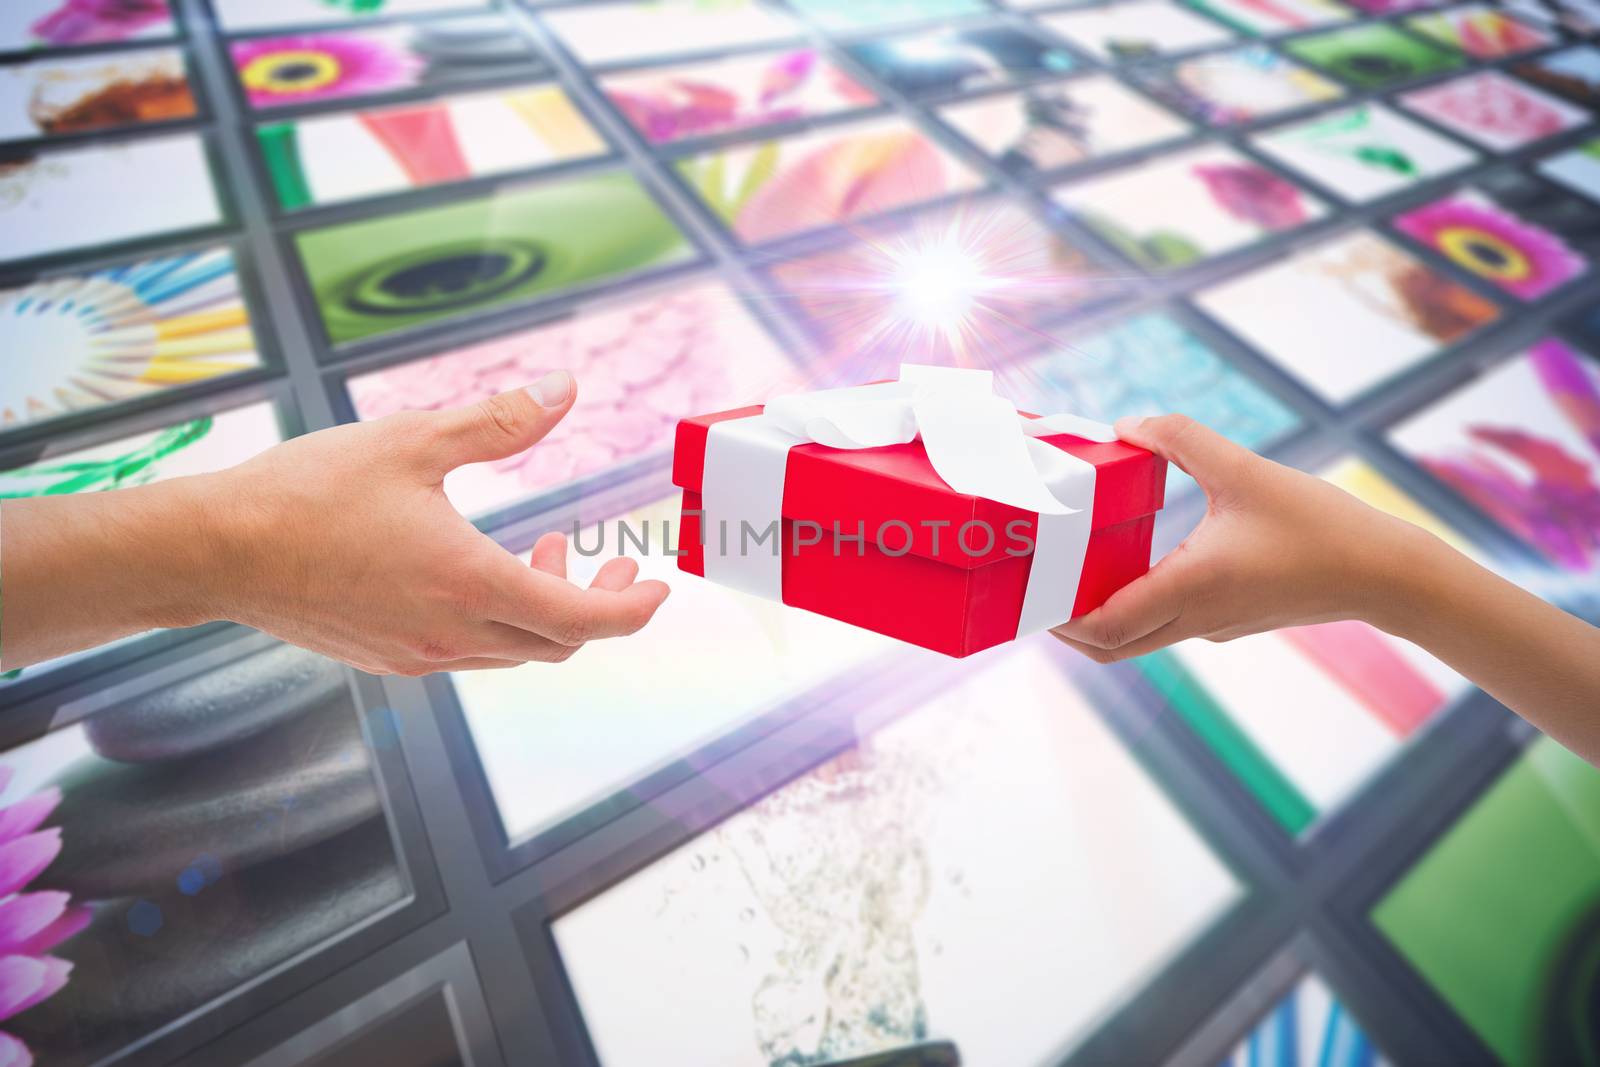 Couple passing a wrapped gift against screen collage showing lifestyle images